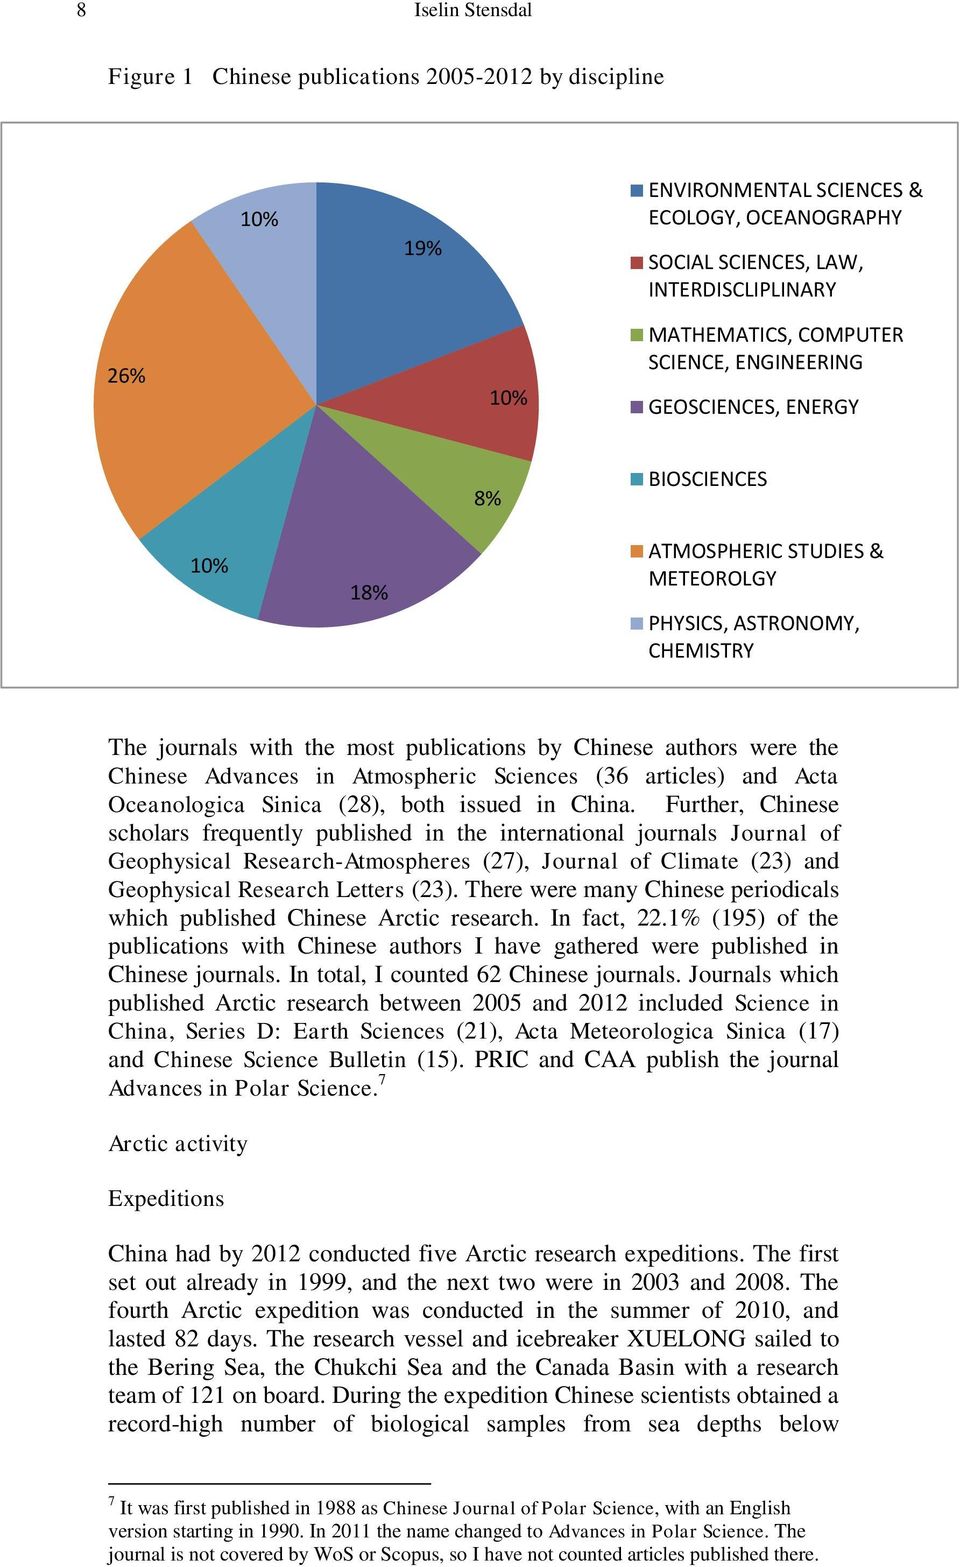 Chinese Advances in Atmospheric Sciences (36 articles) and Acta Oceanologica Sinica (28), both issued in China.